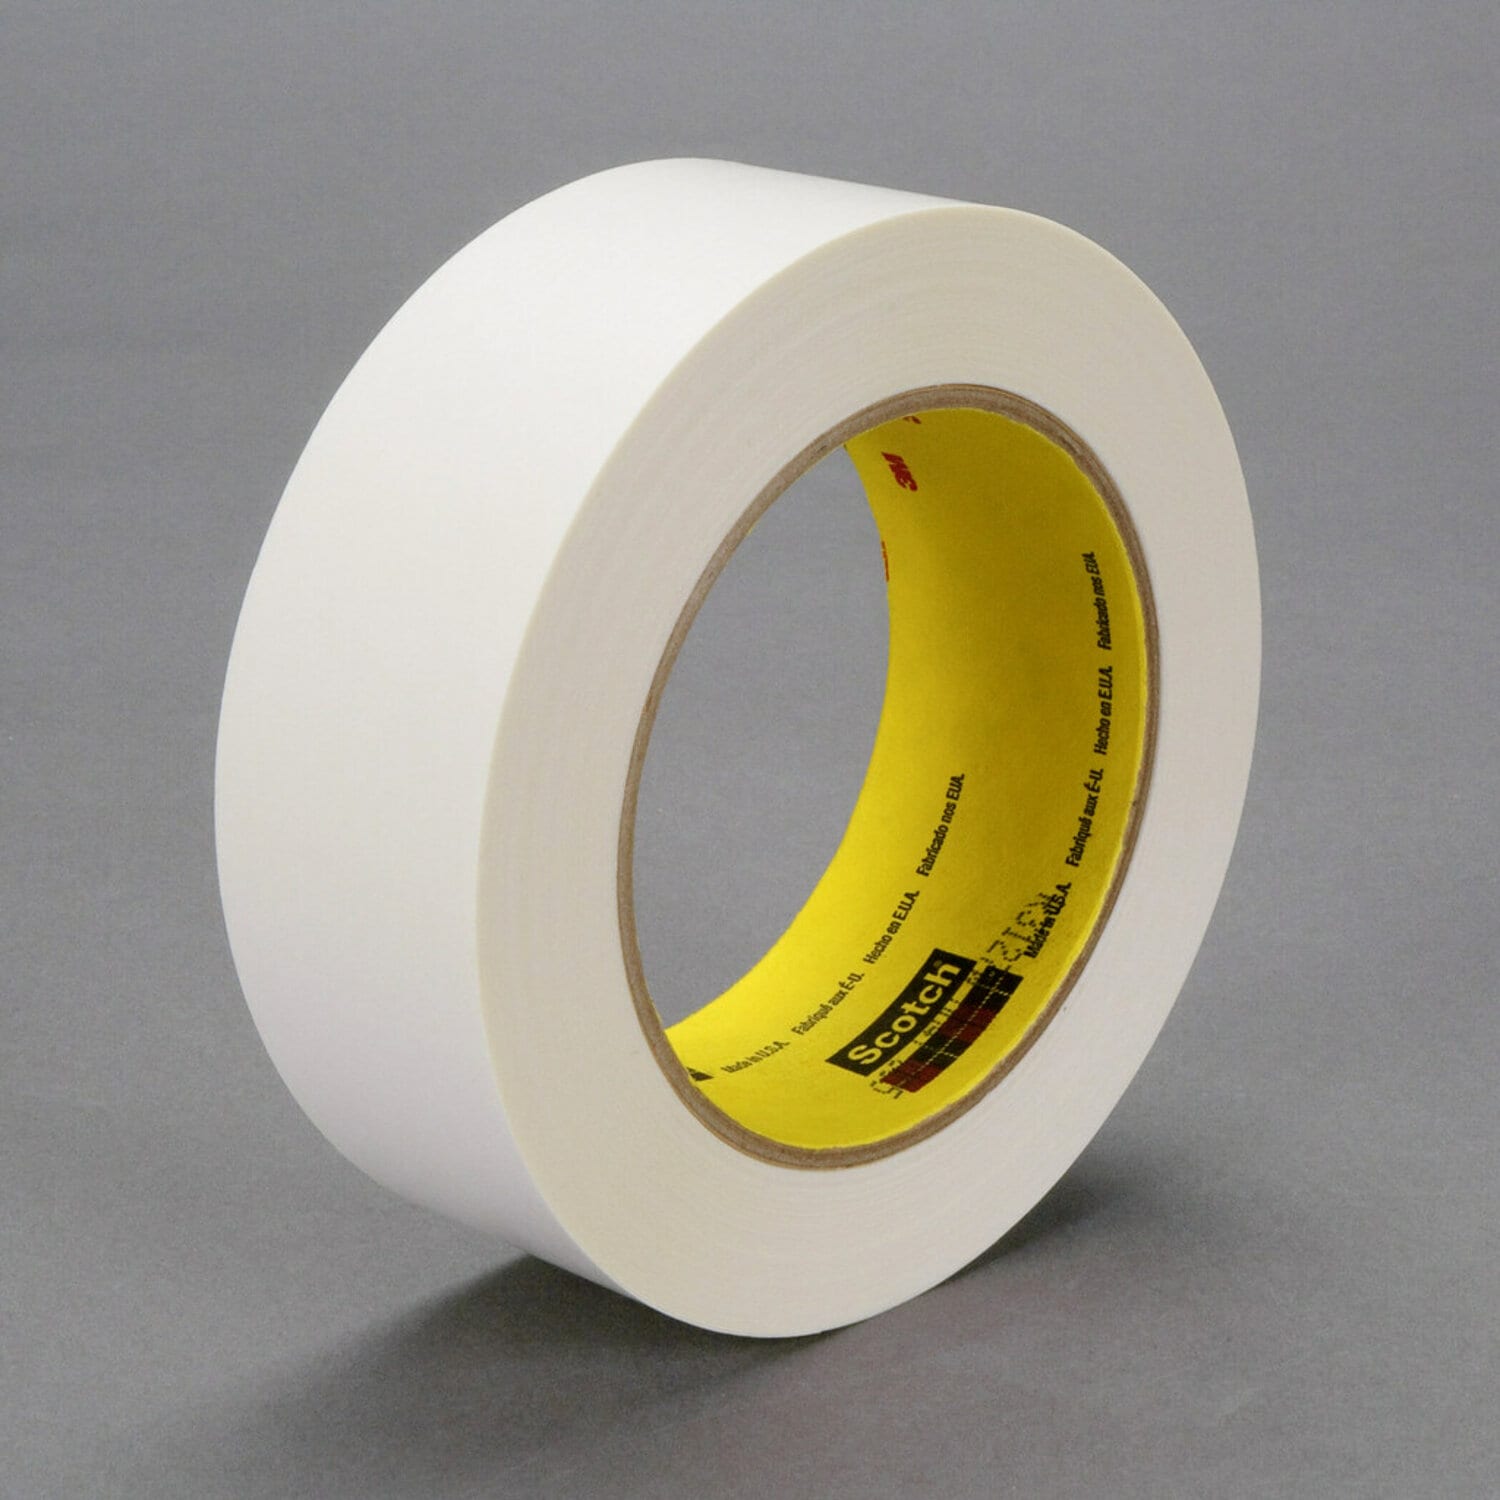 7100005220 - 3M Repulpable Flatback Tape R3127, White, 4.2 mil, Roll, Config